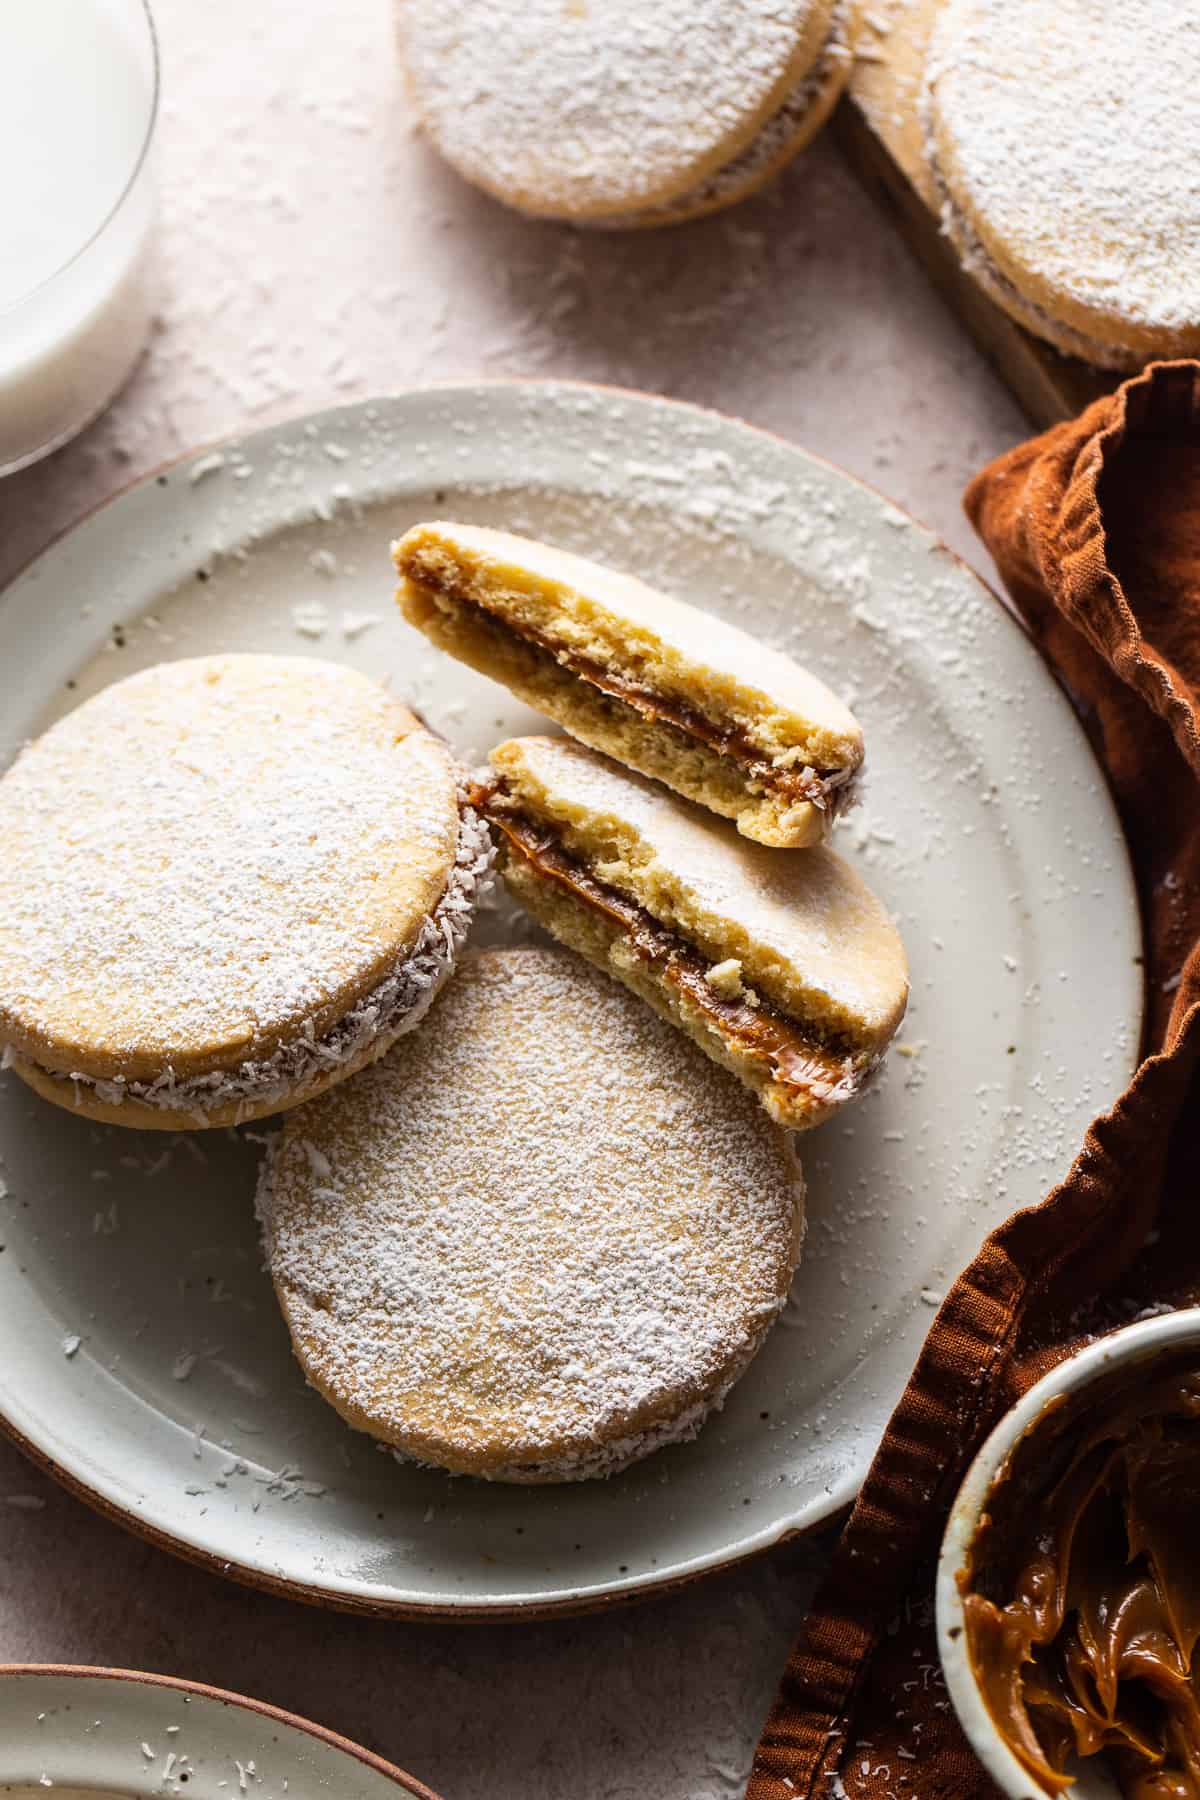 3 alfajores on a plate. 1 of the alfajores is cut in half and you're able to see the gooey dulce de leche filling.